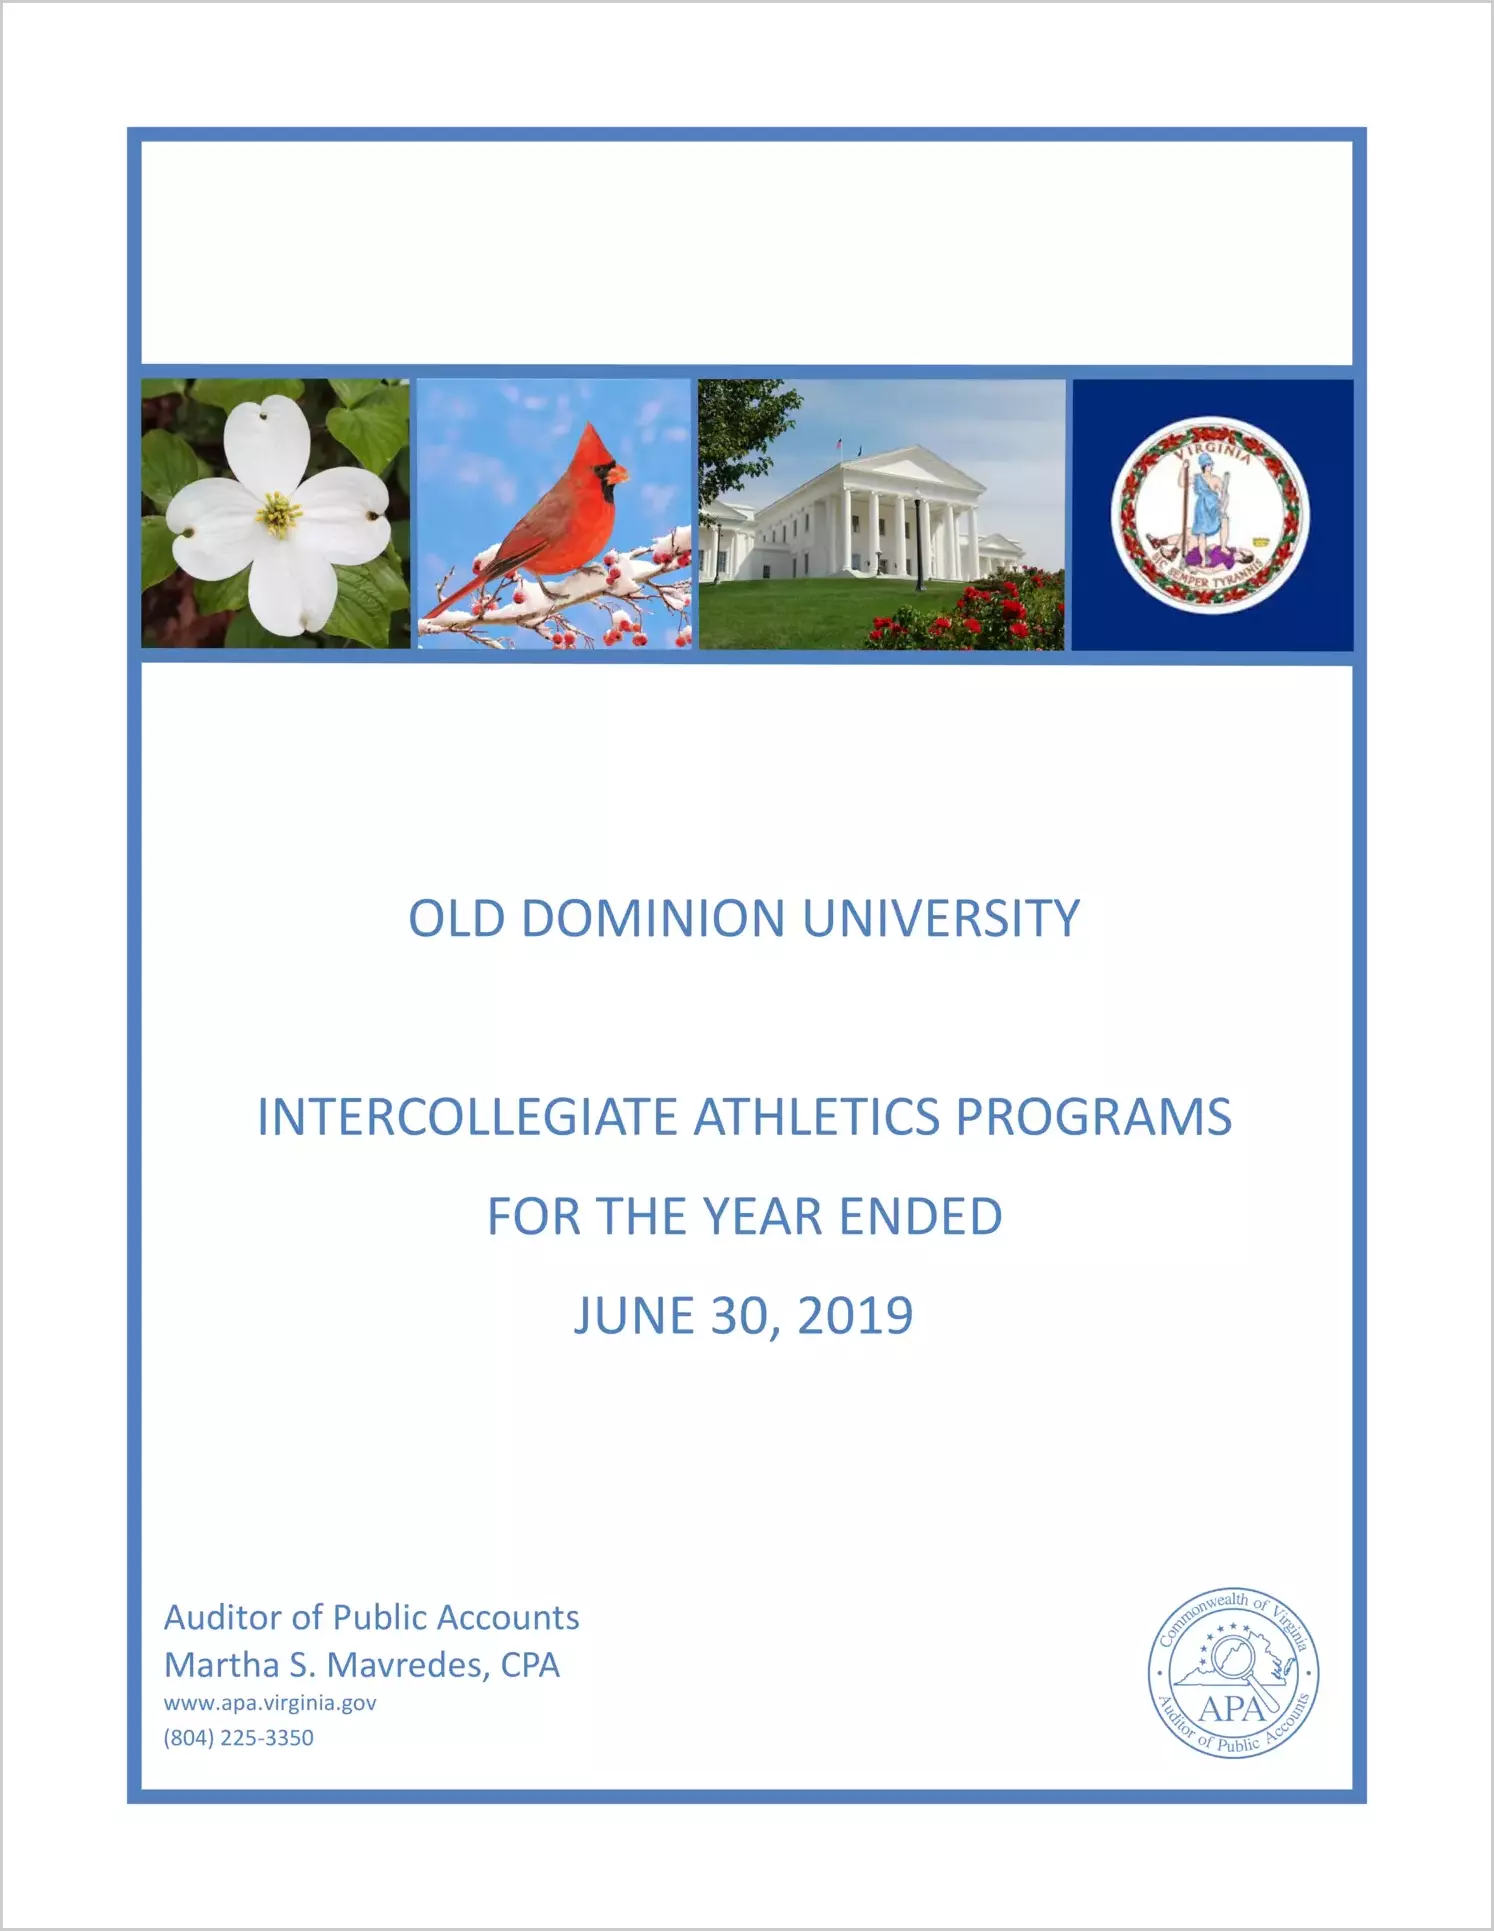 Old Dominion University Intercollegiate Athletics Programs for the year ended June 30, 2019